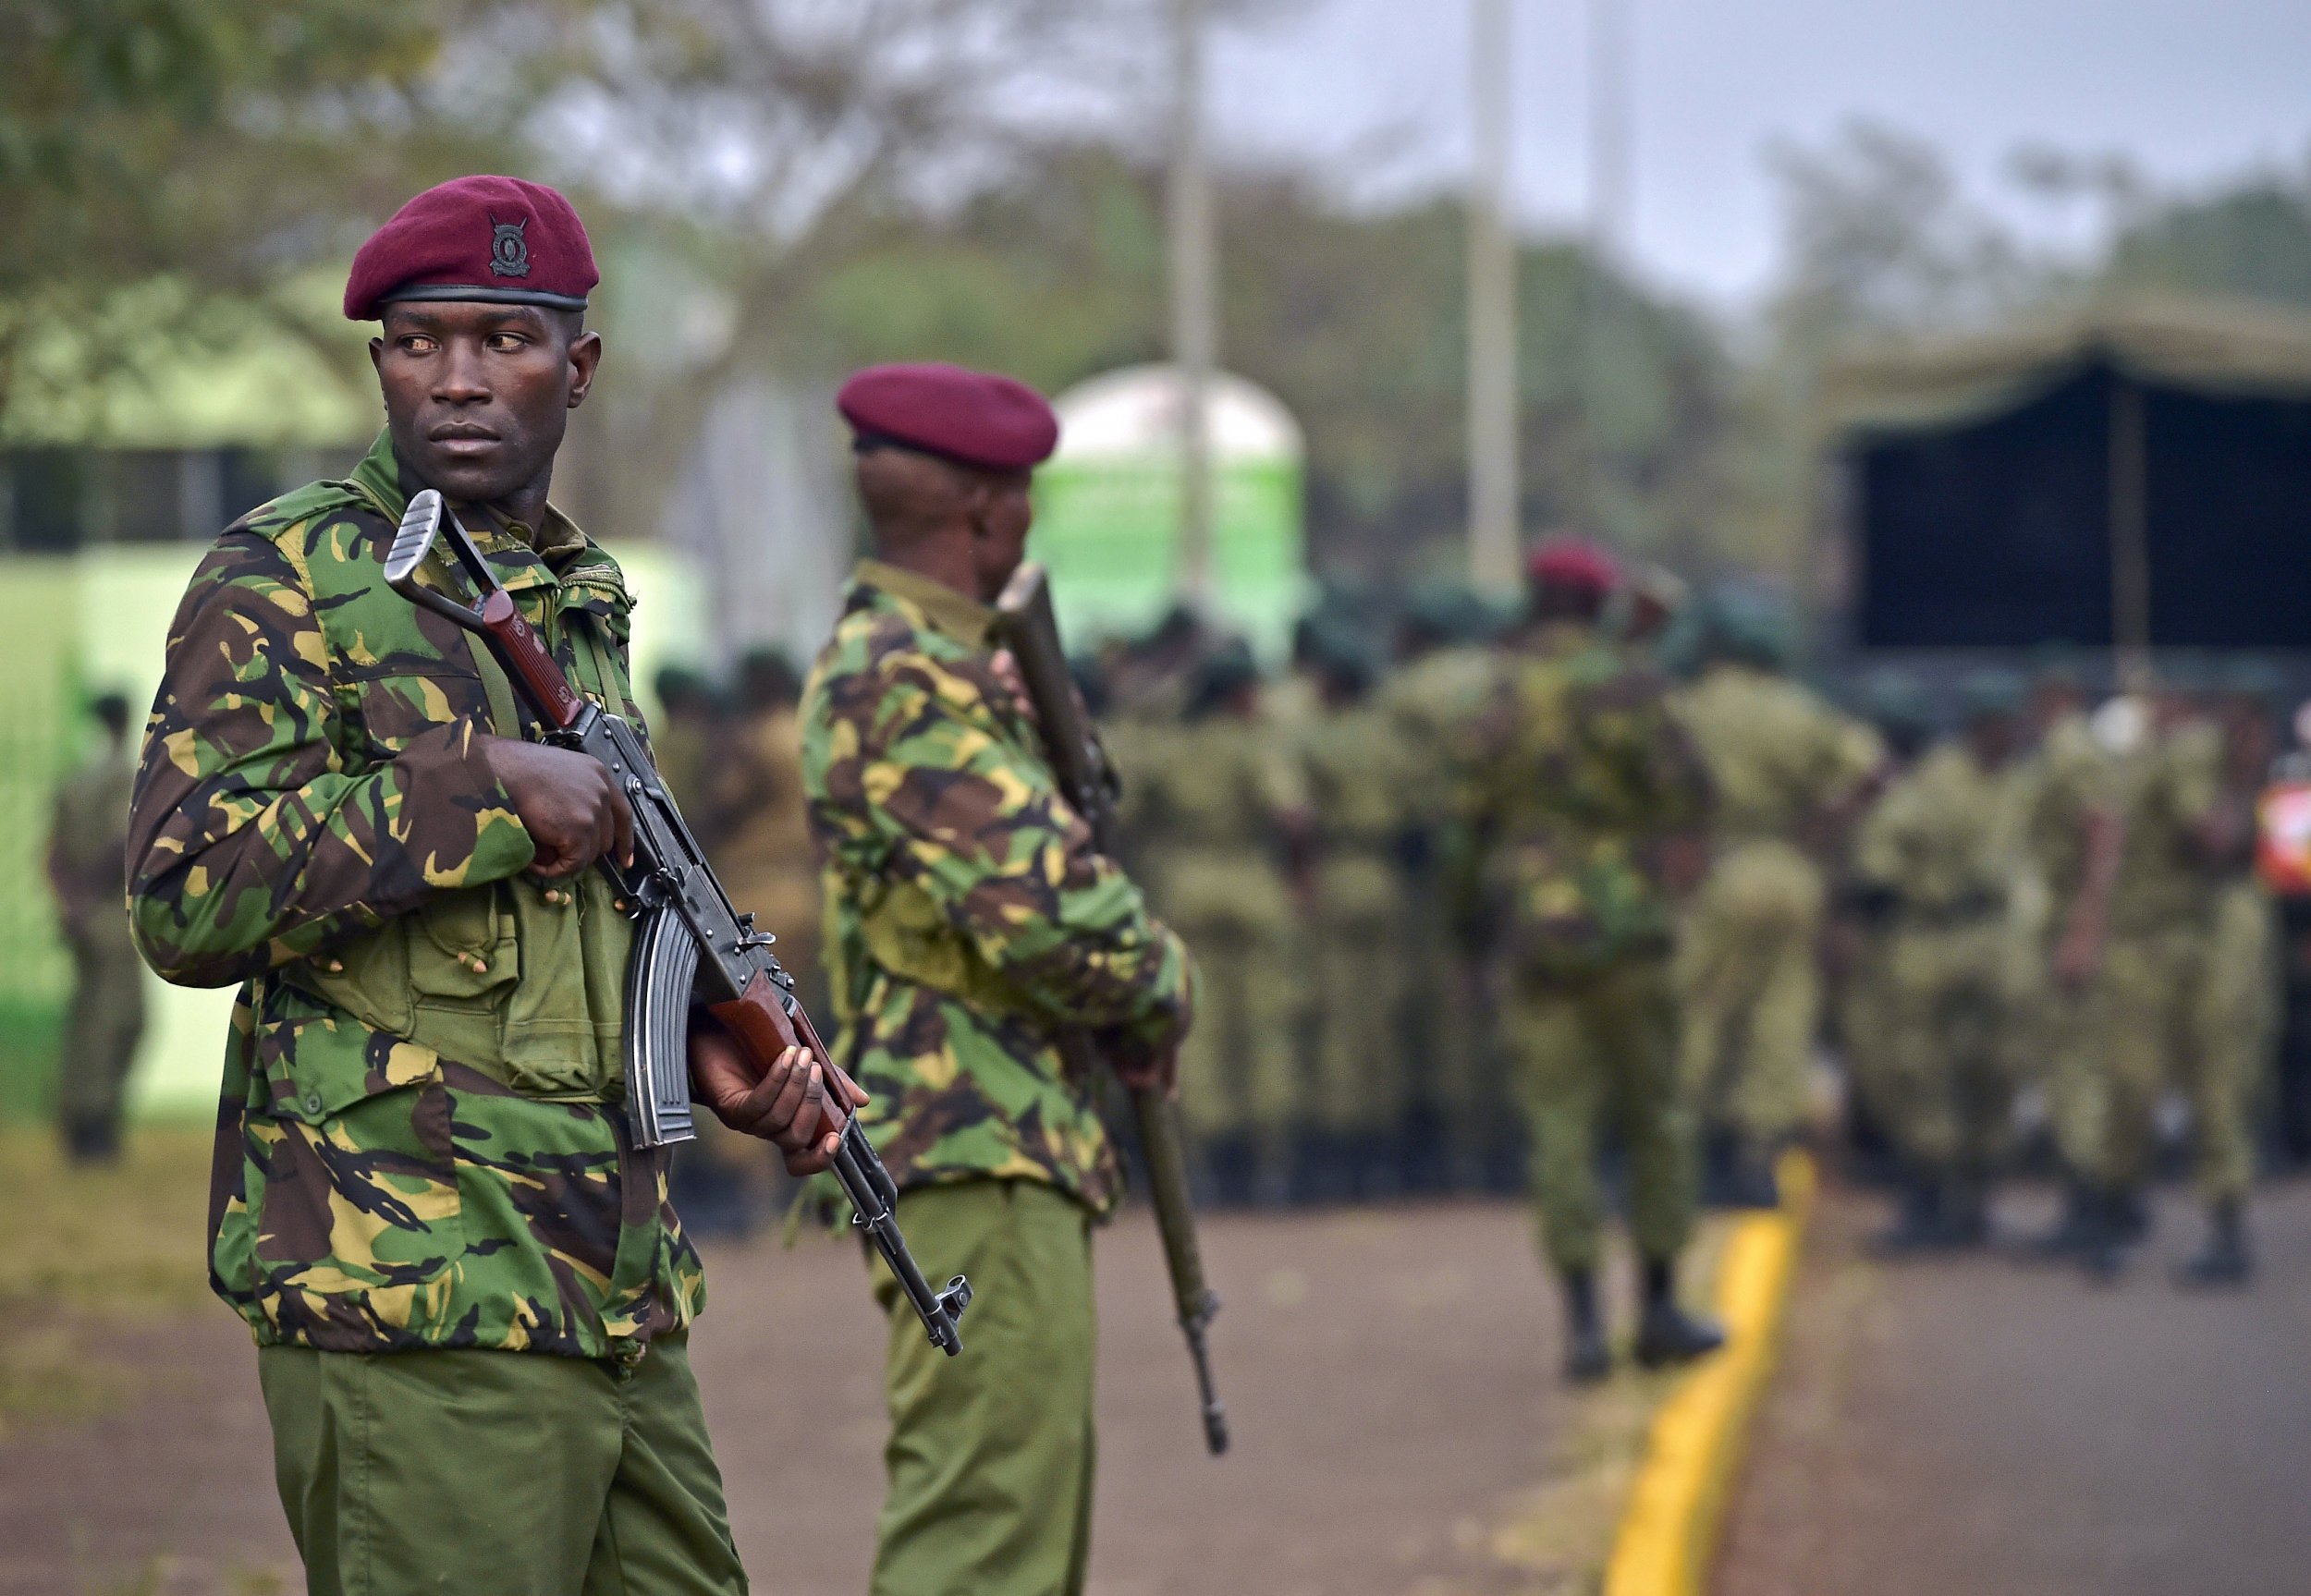 Kenya and children impacted by armed conflicts